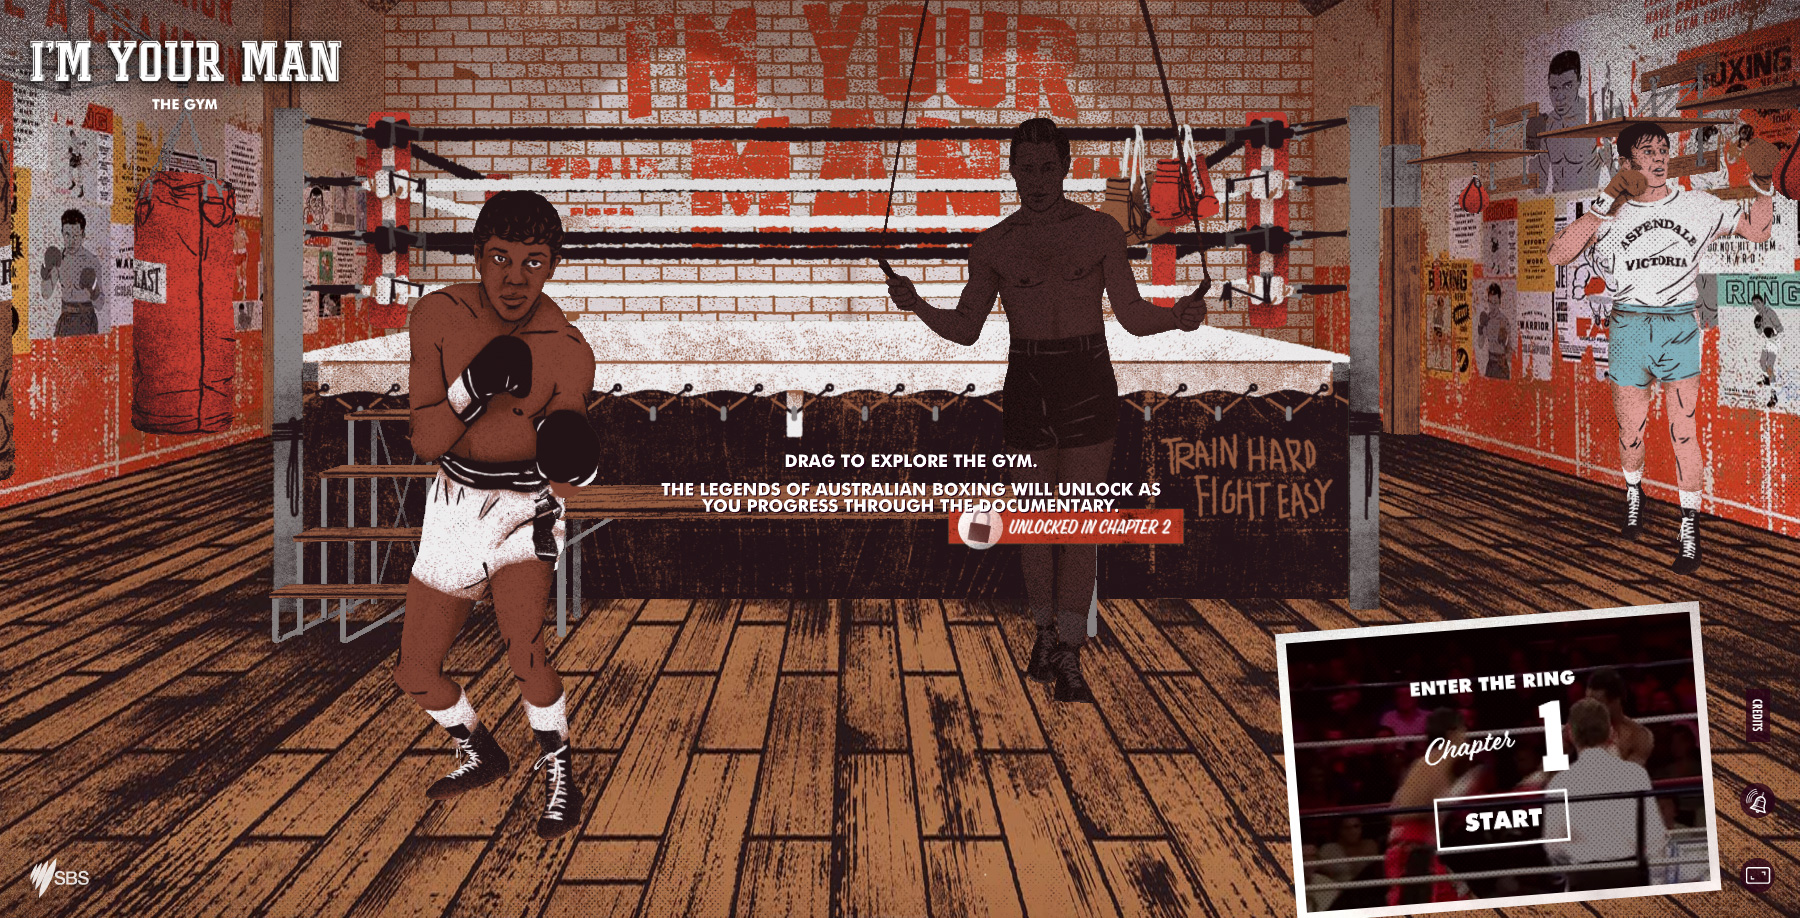 I’m Your Man - Website of the Day